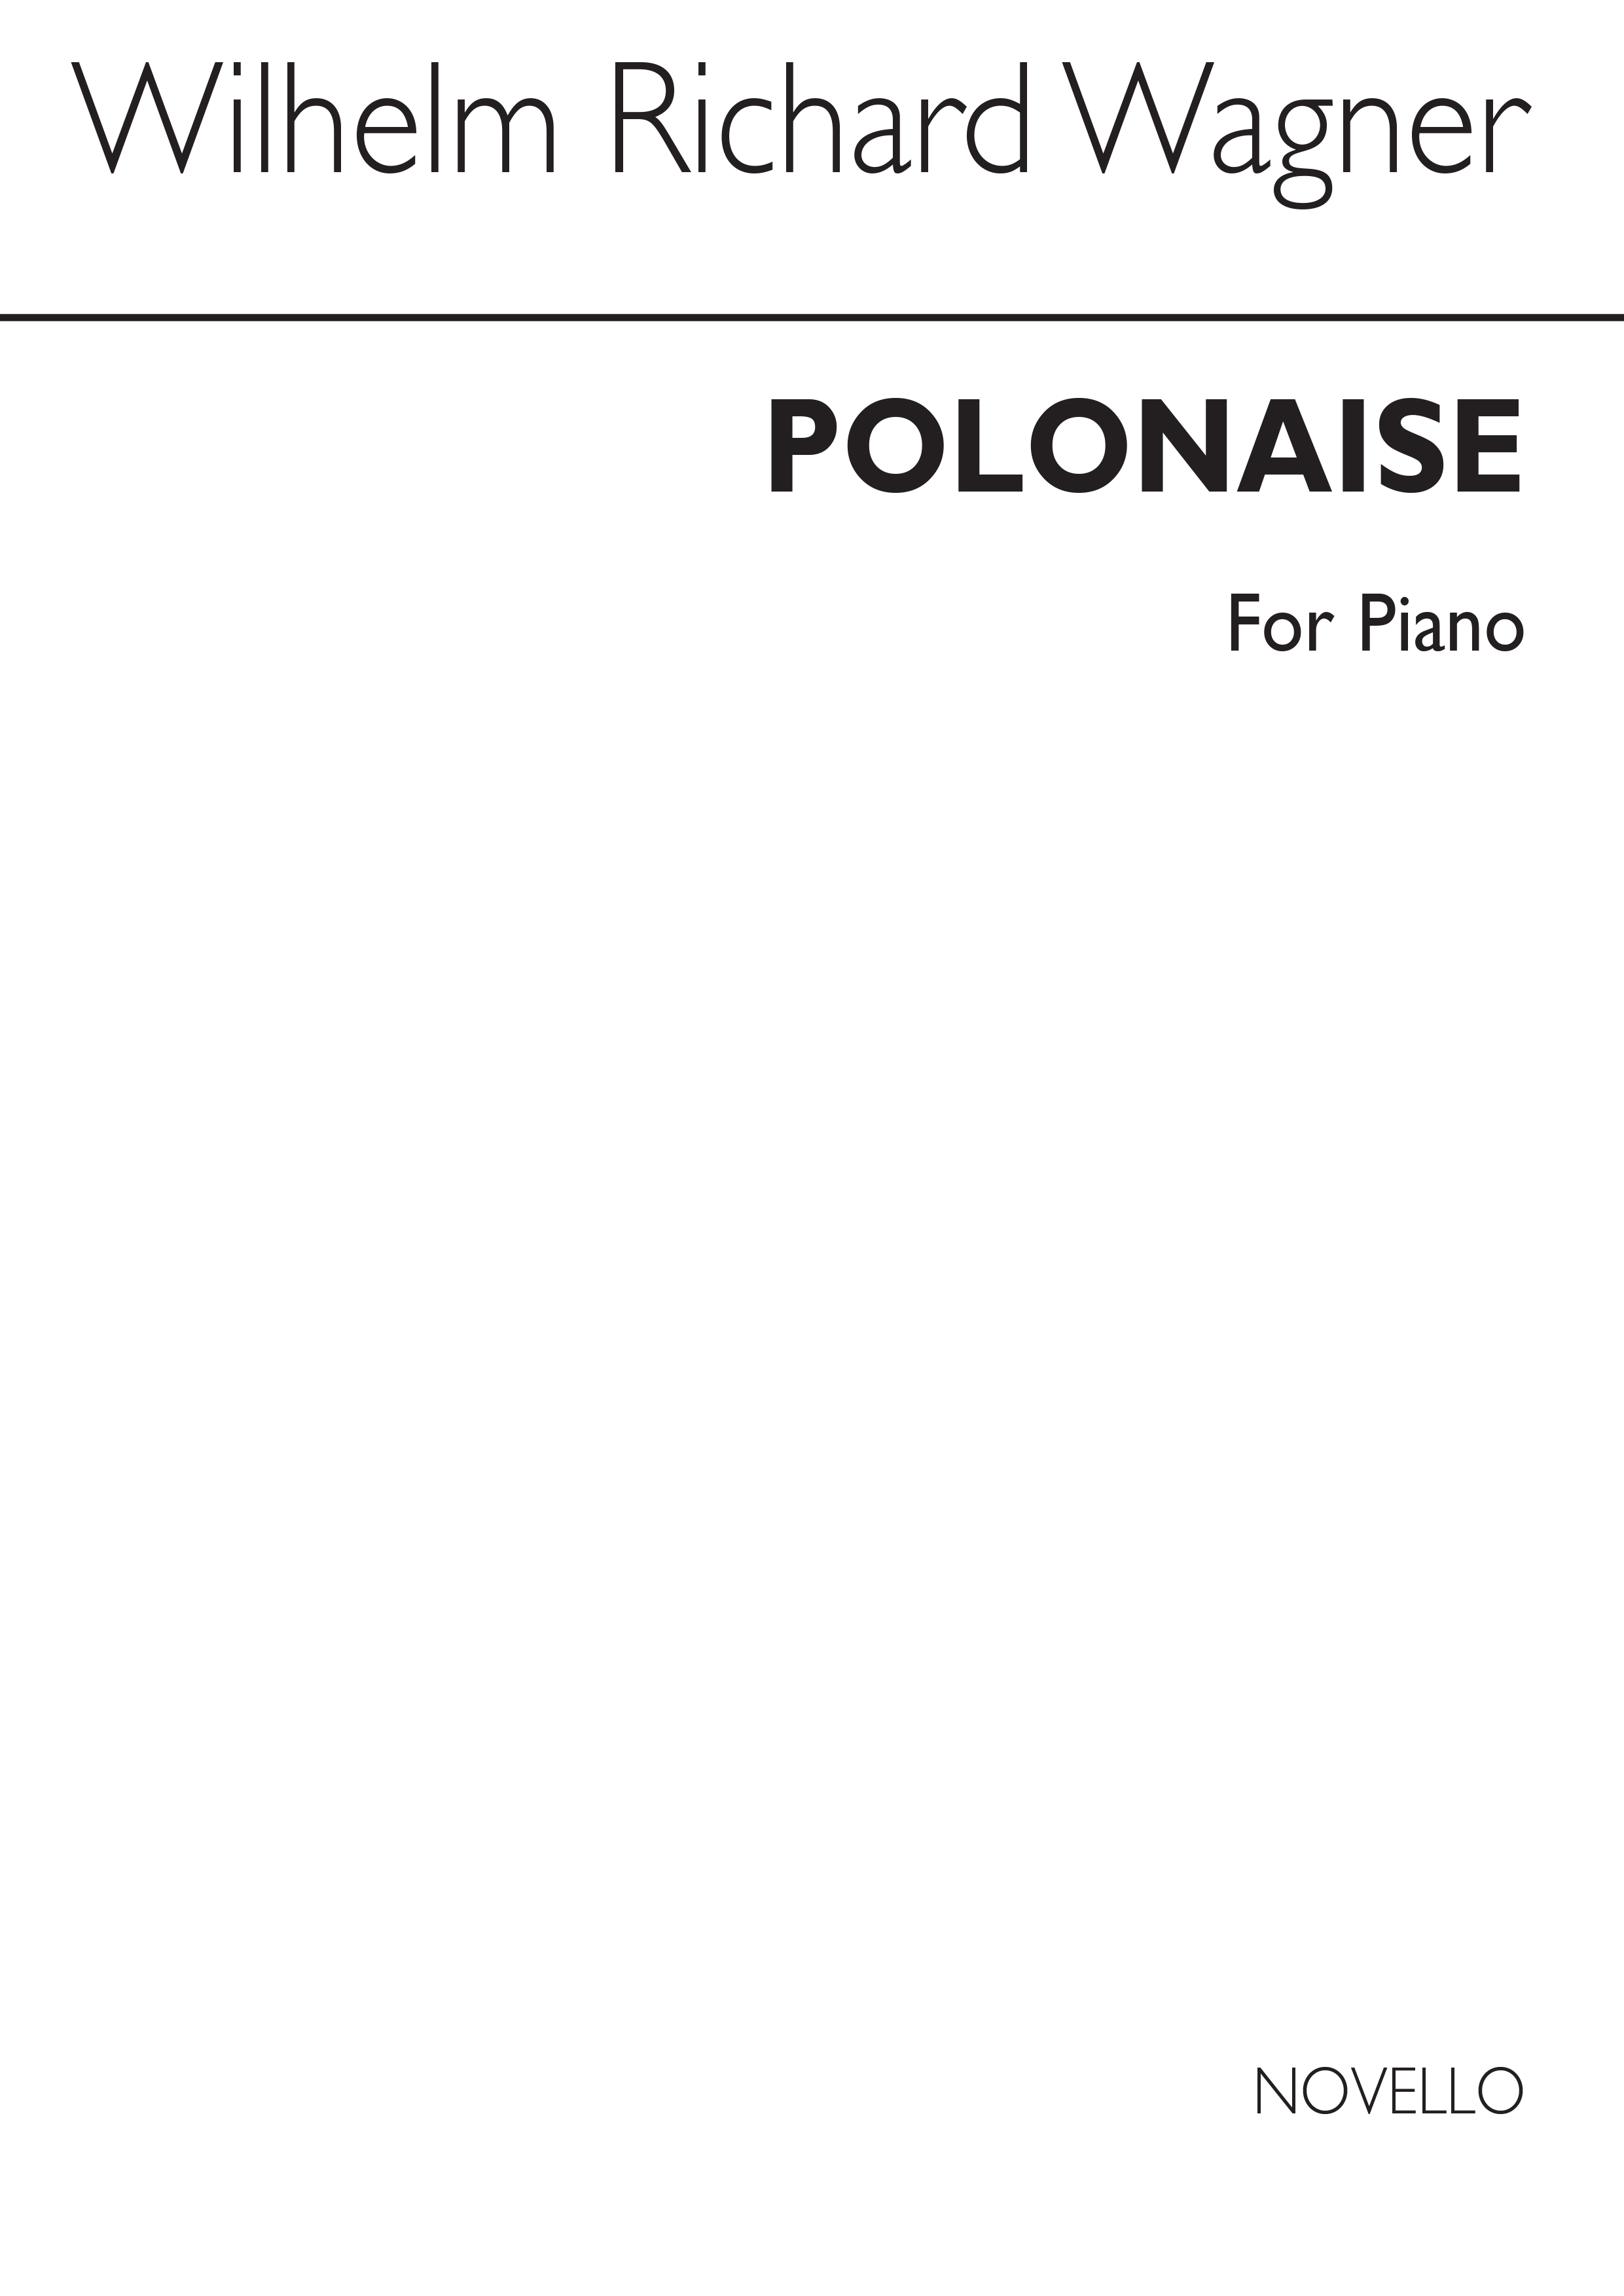 Wagner: Polonaise for Piano